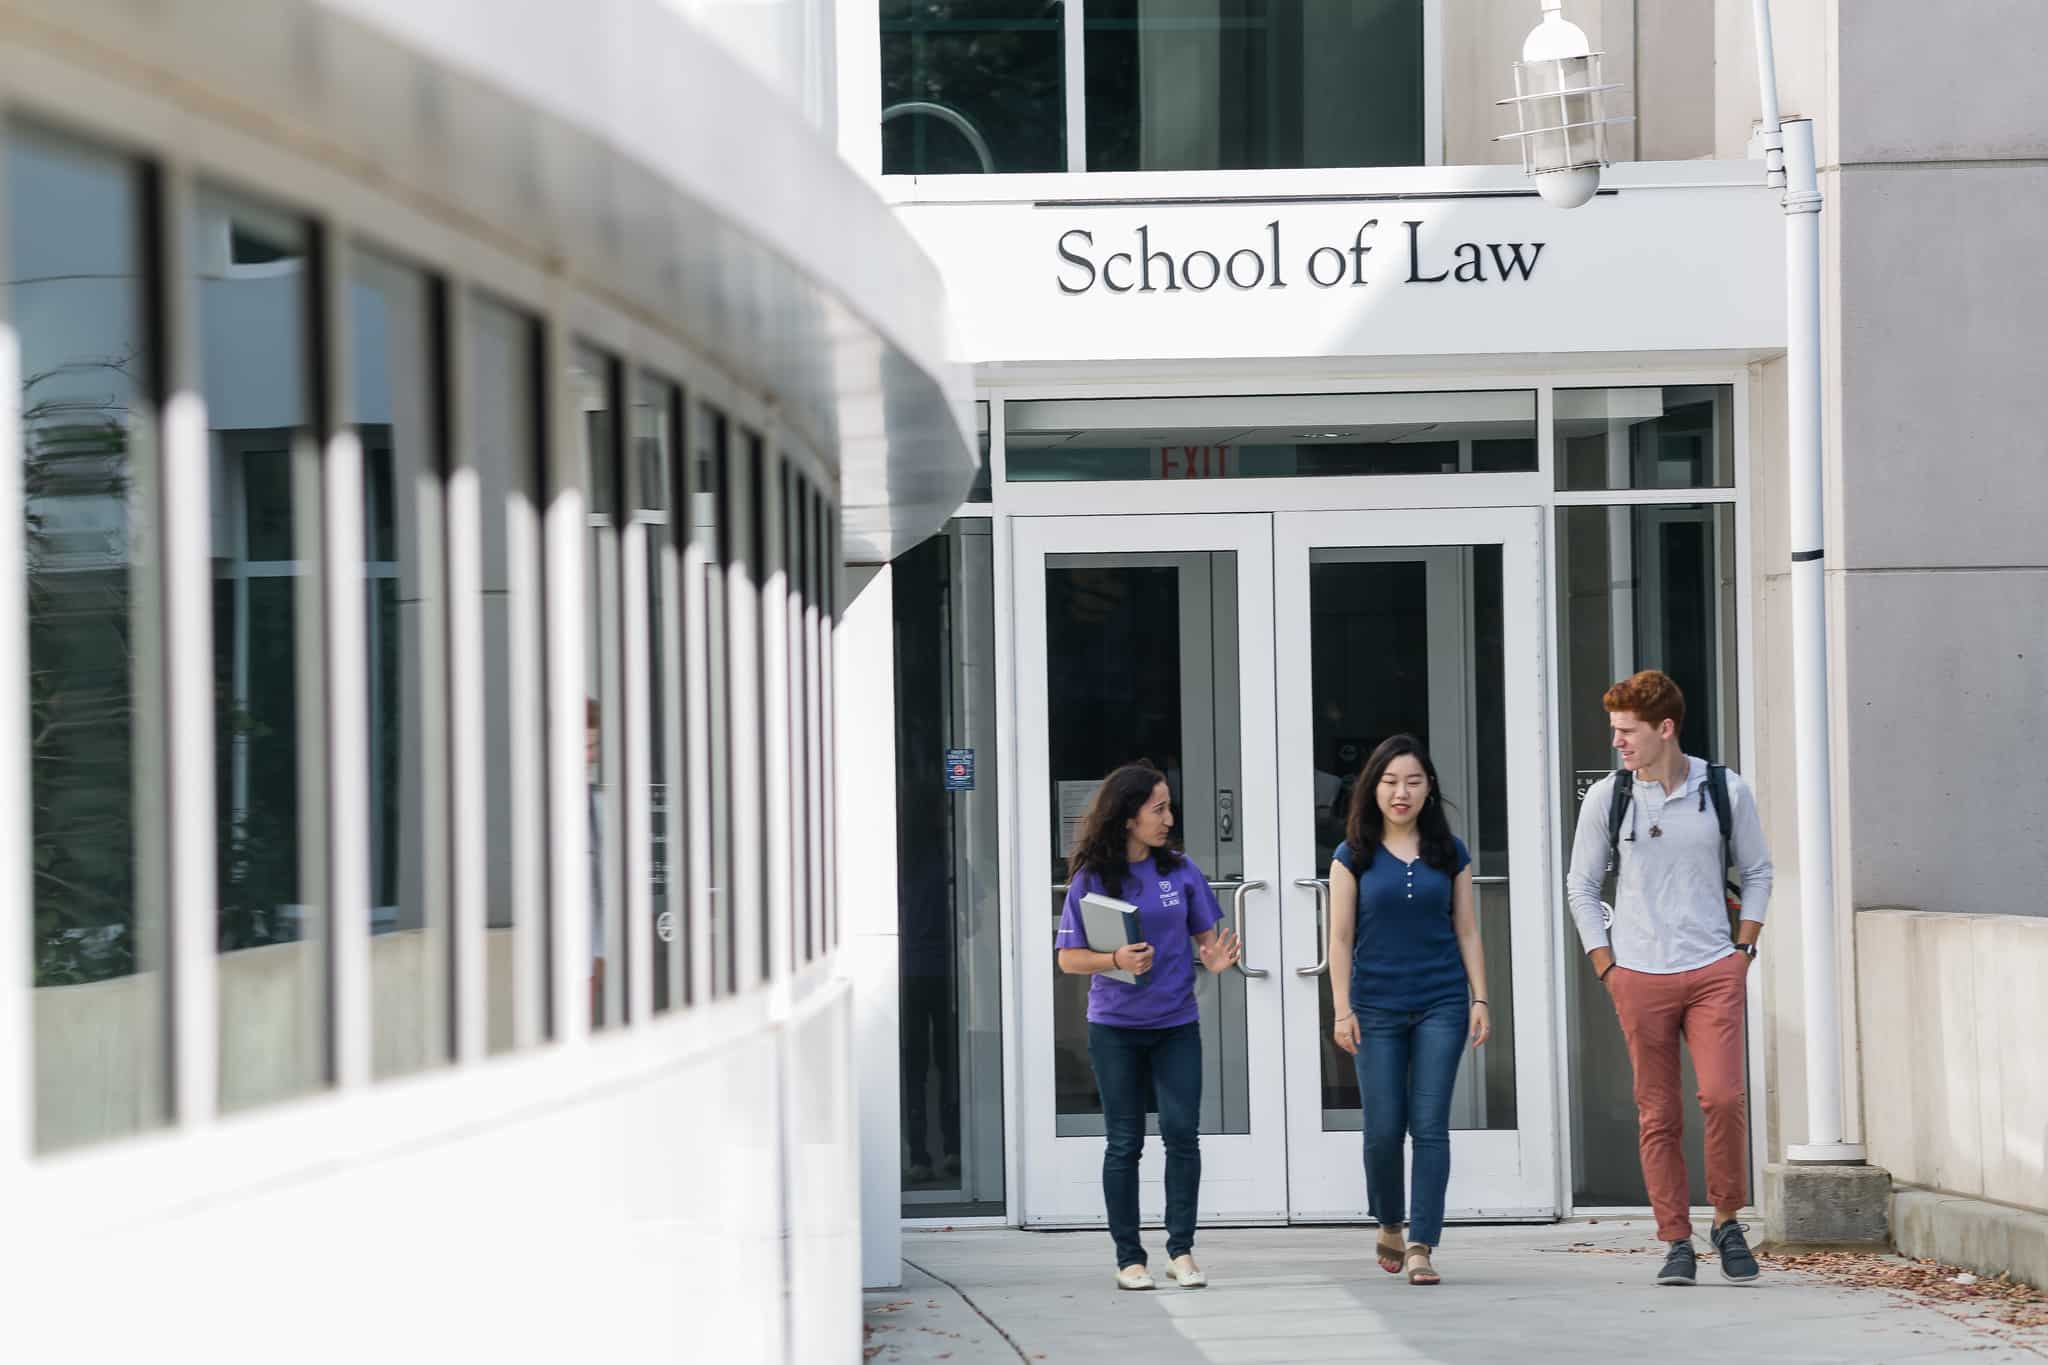 4 reasons why today's (and tomorrow's) lawyers should choose Emory University